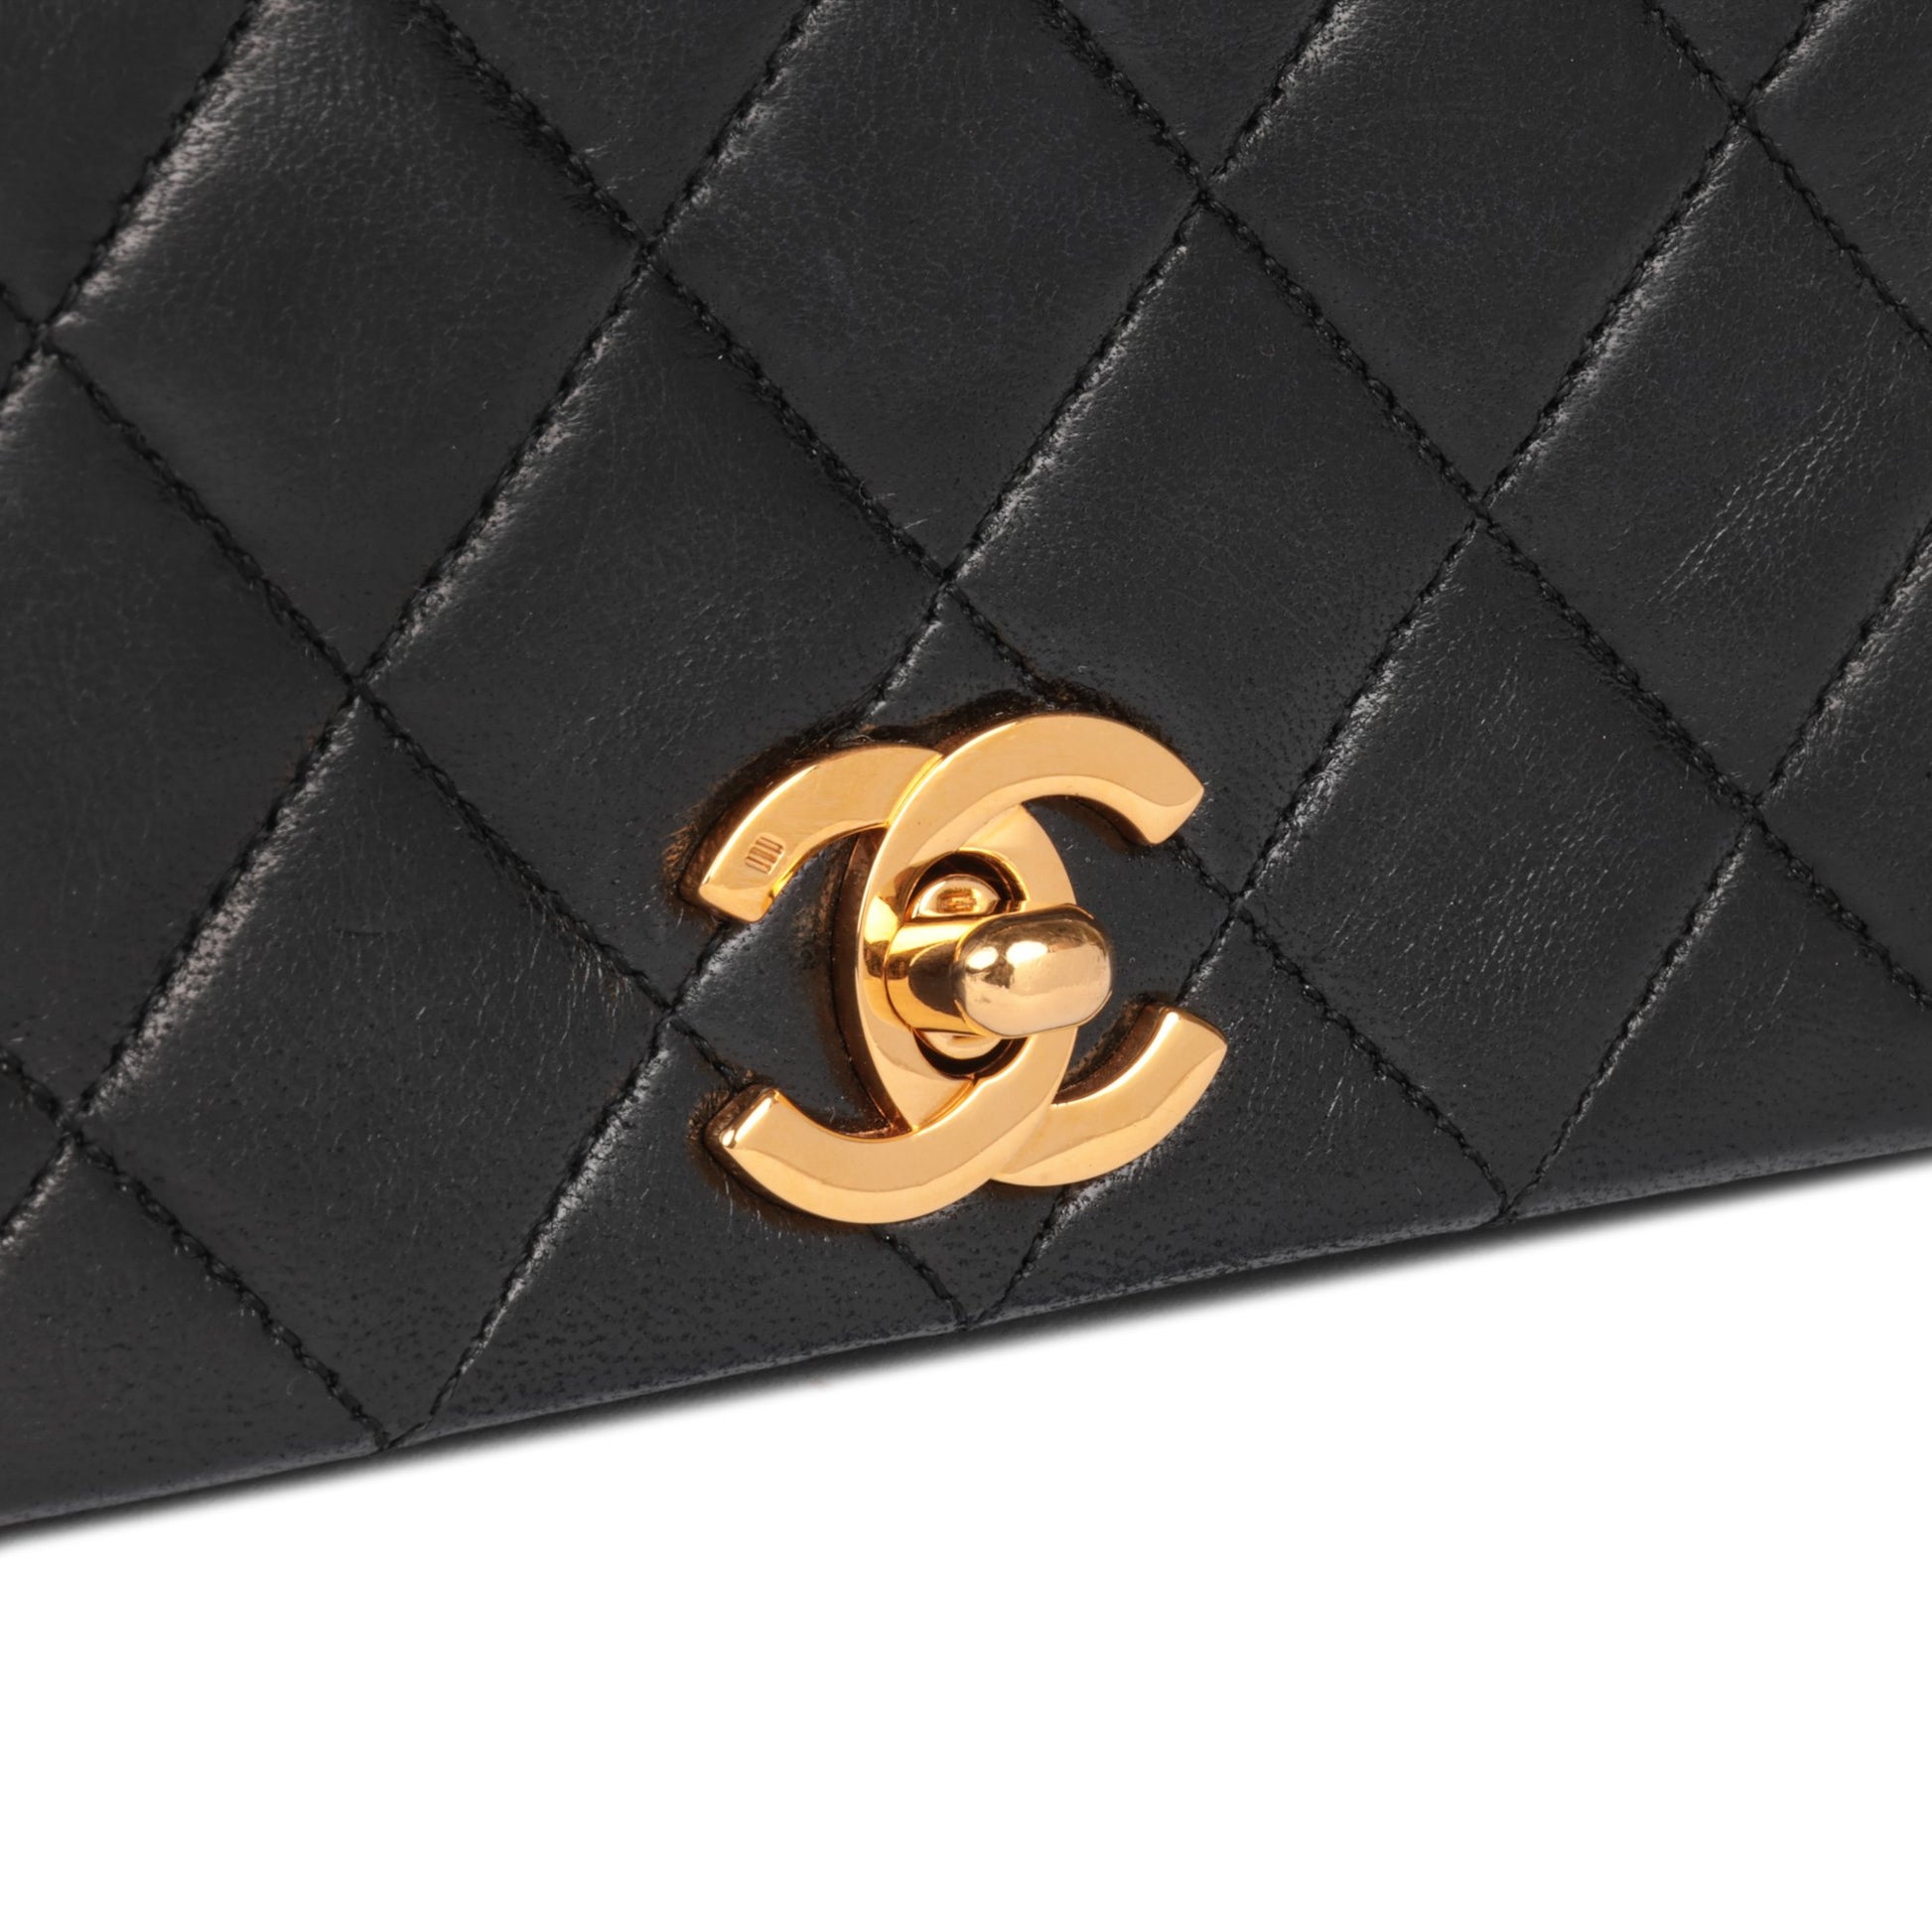 CHANEL Classic Flap Quilted Small Bags & Handbags for Women for sale